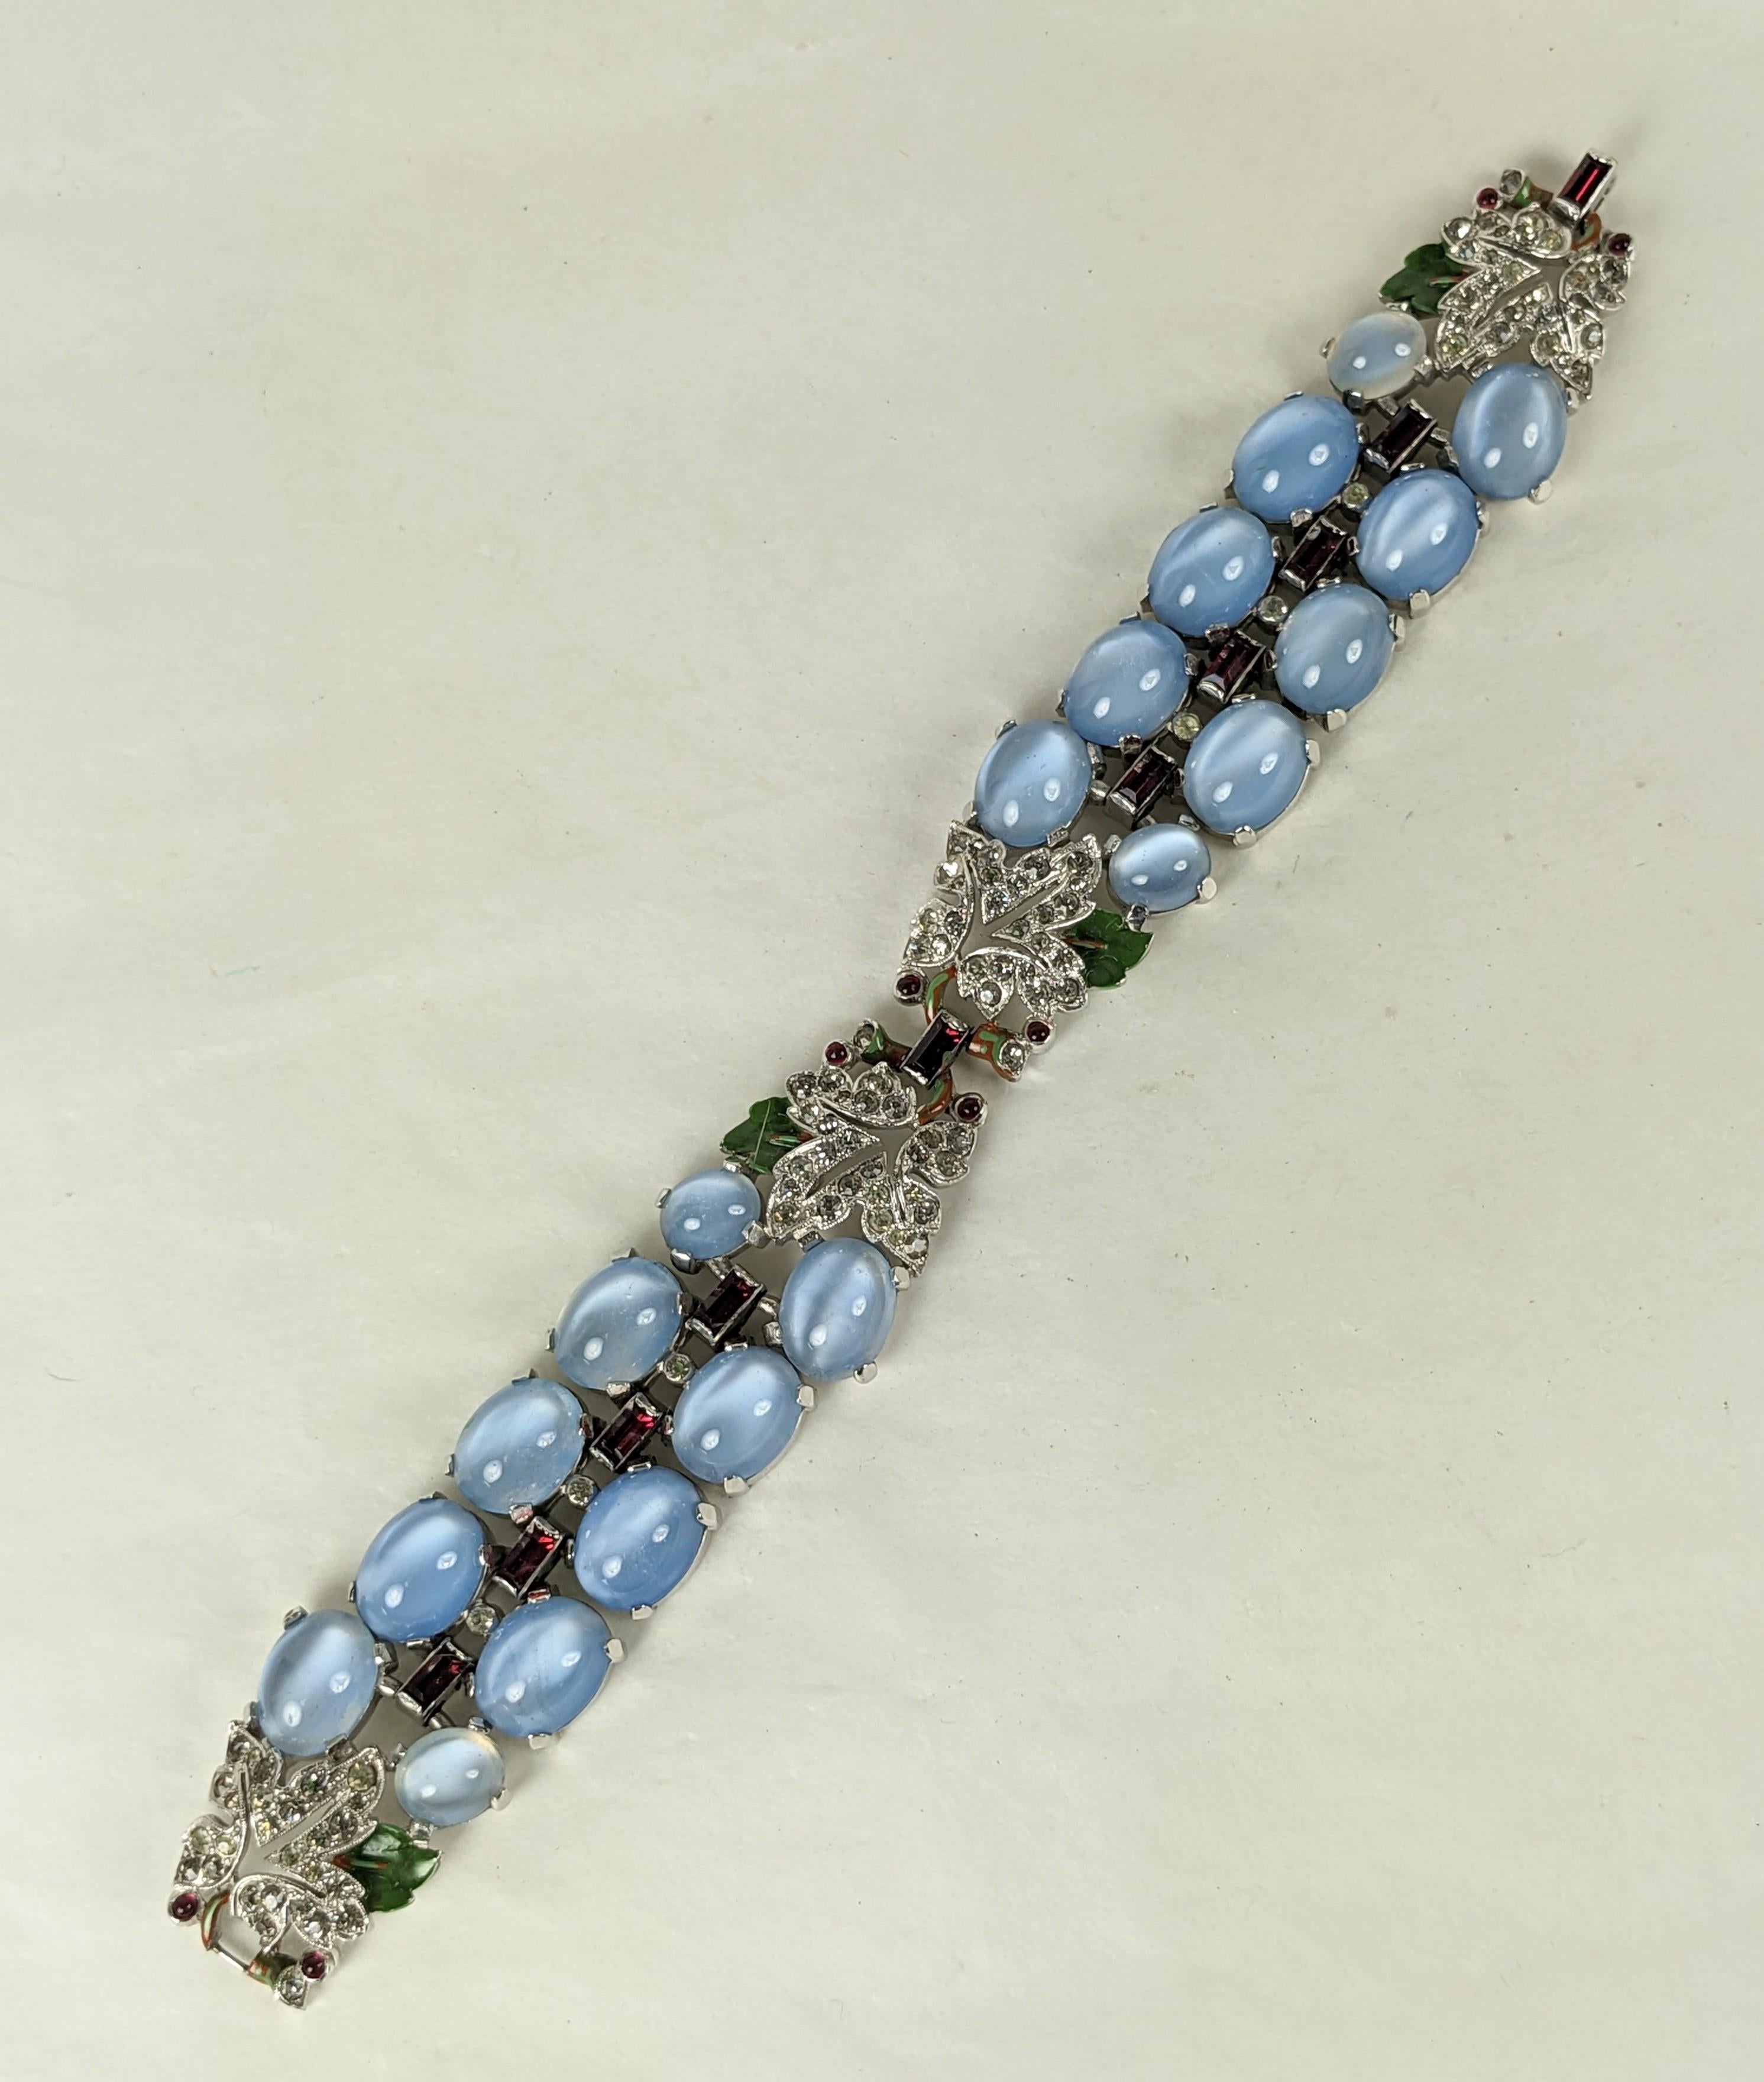 Rare and collectible Trifari Blue Moonstone Ruby and Enamel Deco Bracelet by Alfred Phillipe. 2 rows of oval faux blue moonstones are accented with enamel, ruby baguettes and cabs within pave rhinestone leaves. Rare original enameling. 1930's USA.